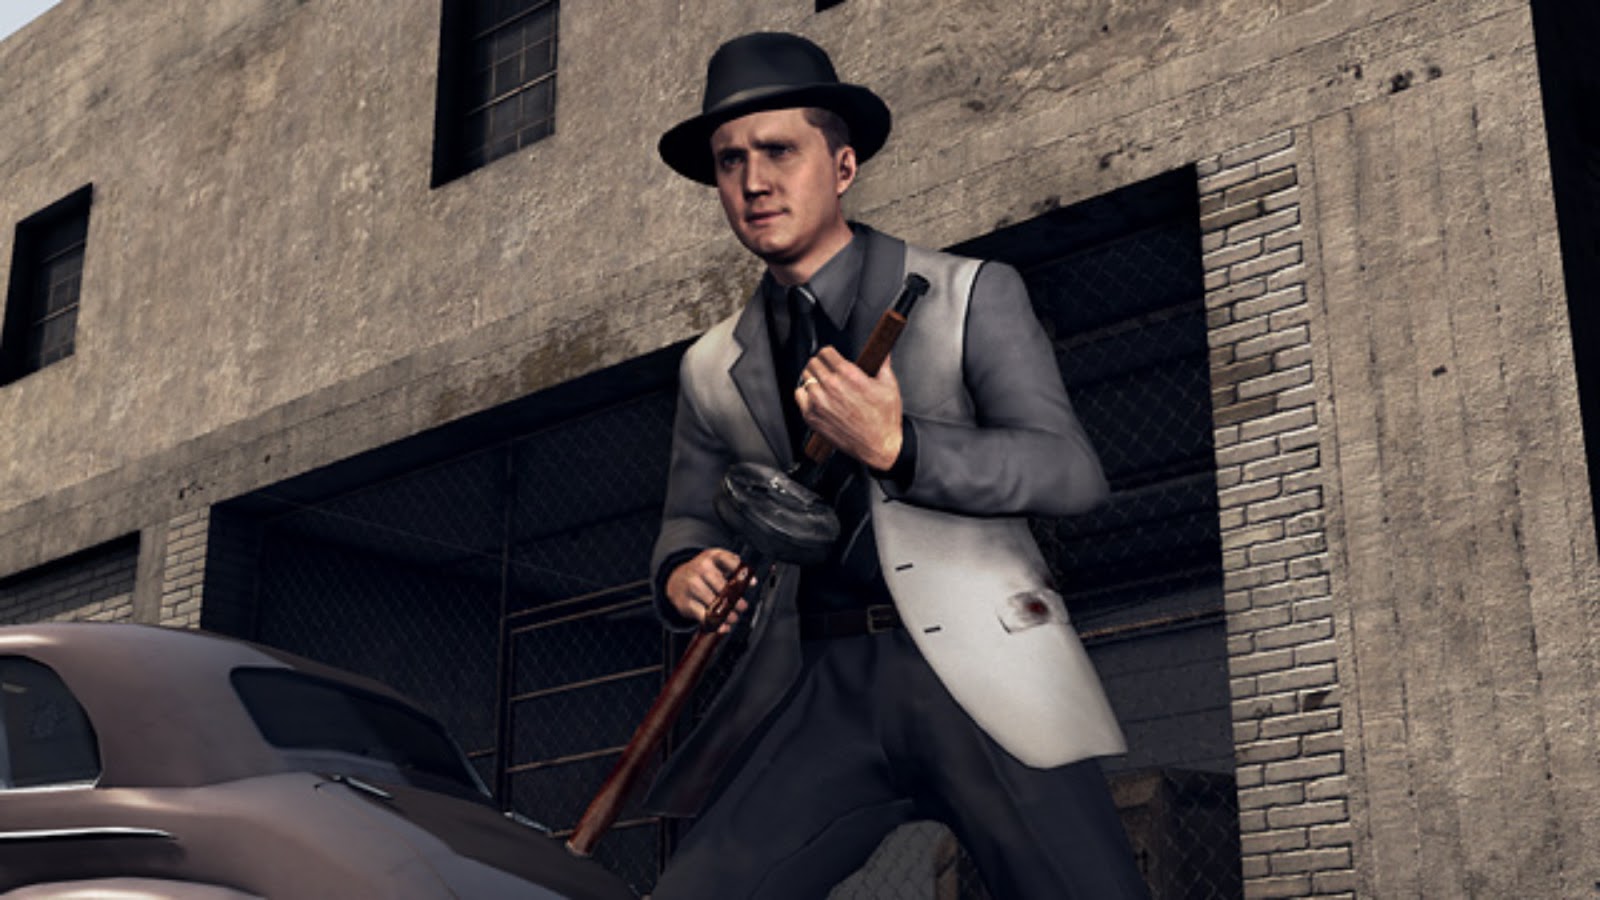 L.A. Noire - Published In Game Character Work.